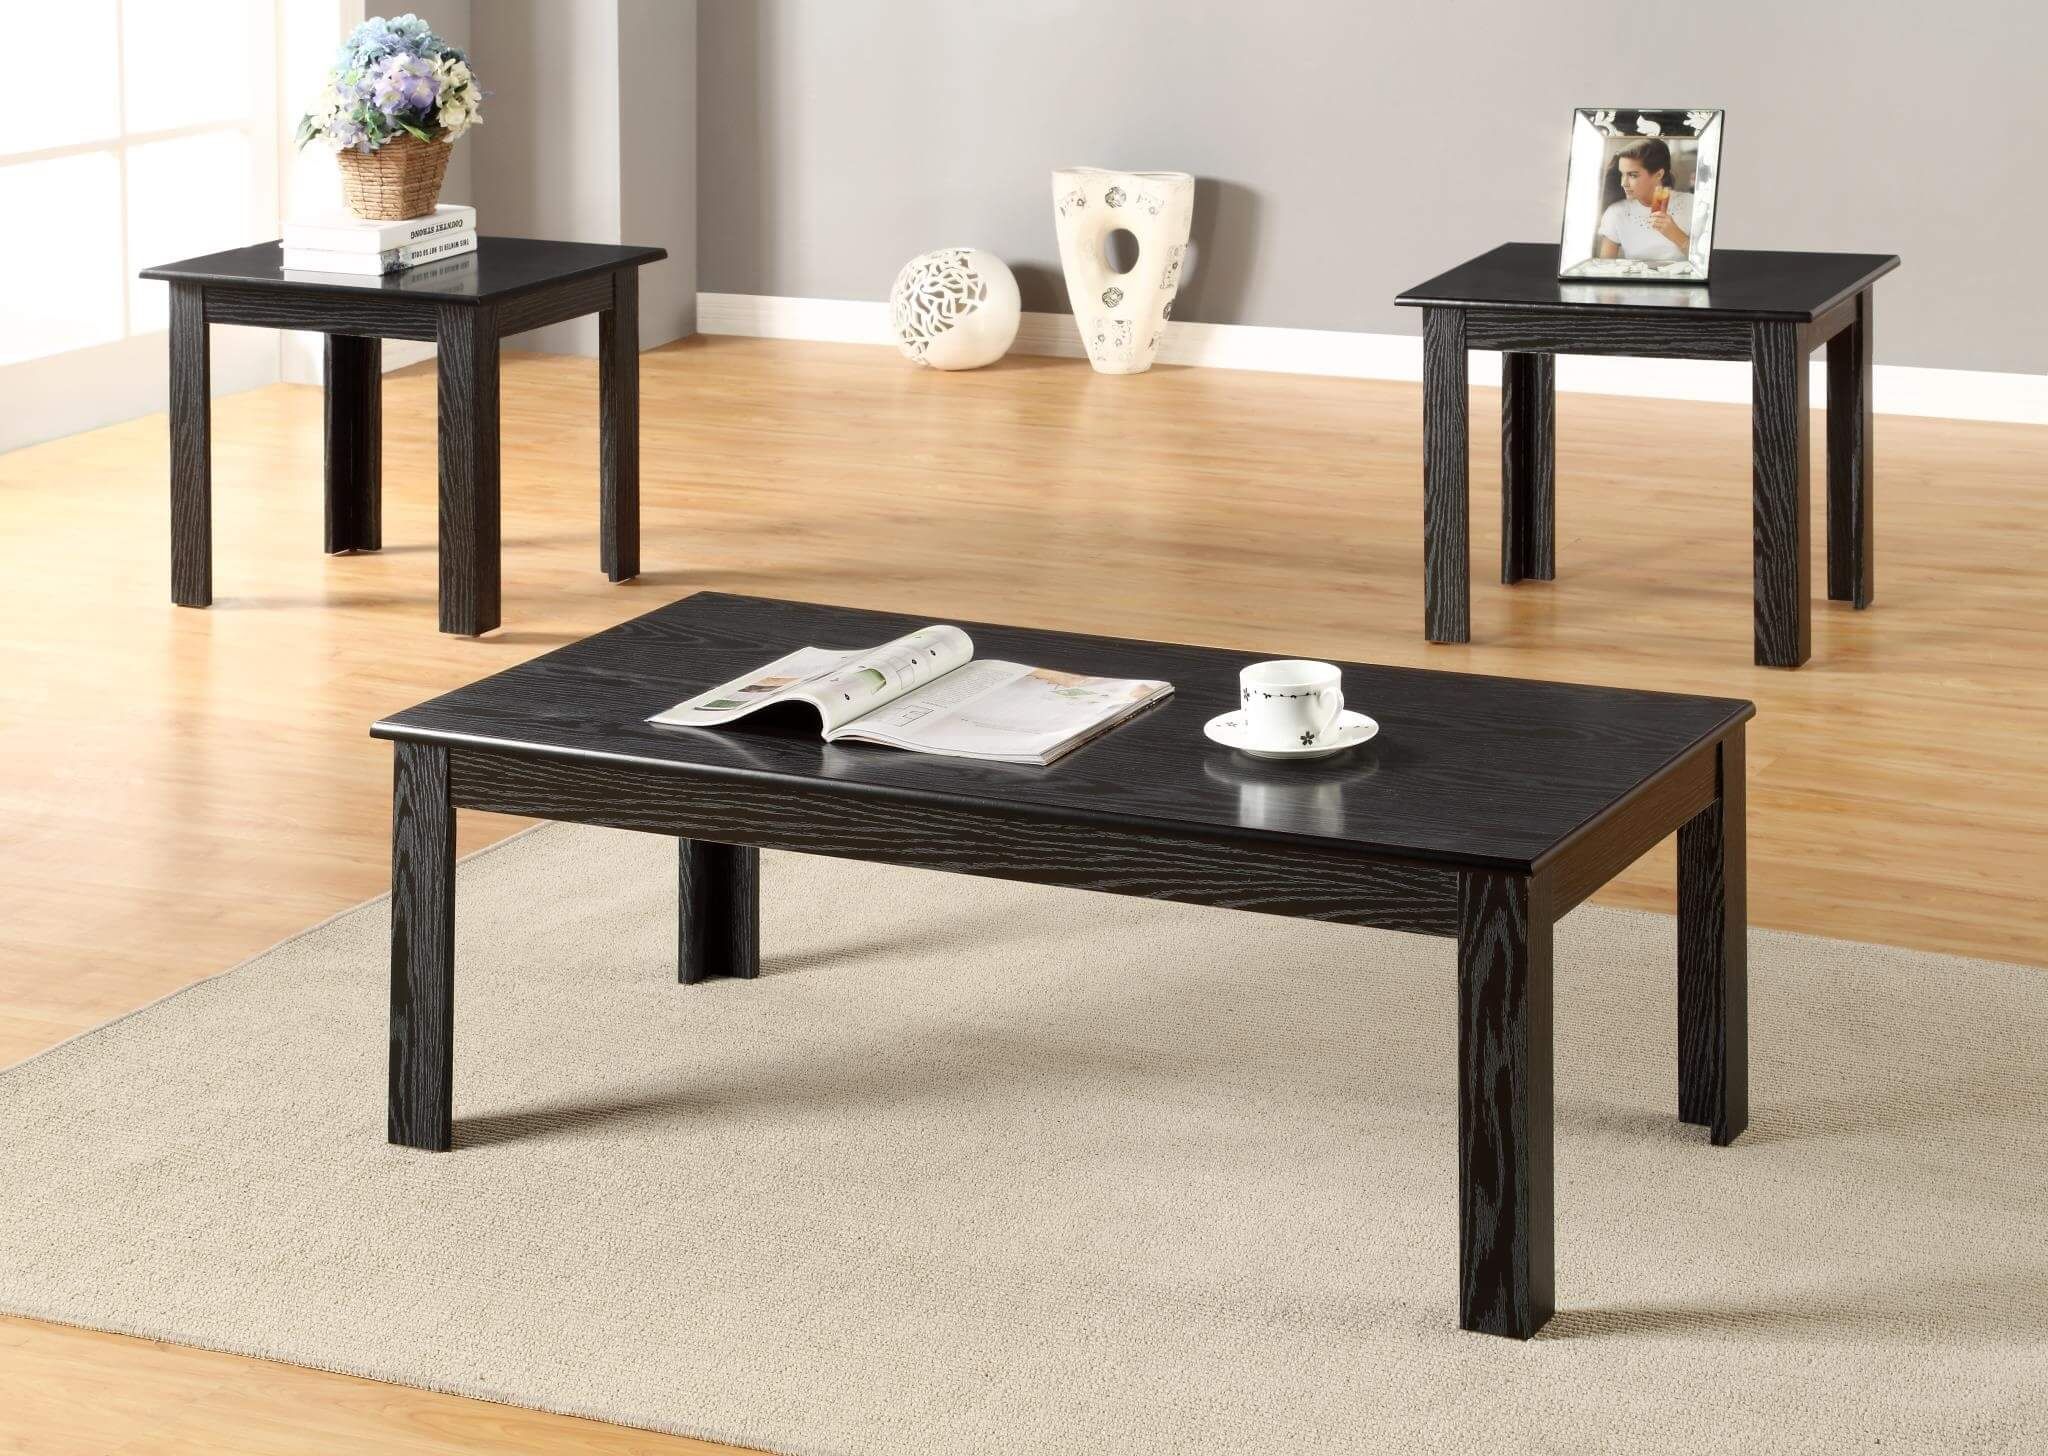 3 Piece Black Coffee And End Table Set | Occasional Tables Inside Aged Black Coffee Tables (View 4 of 15)